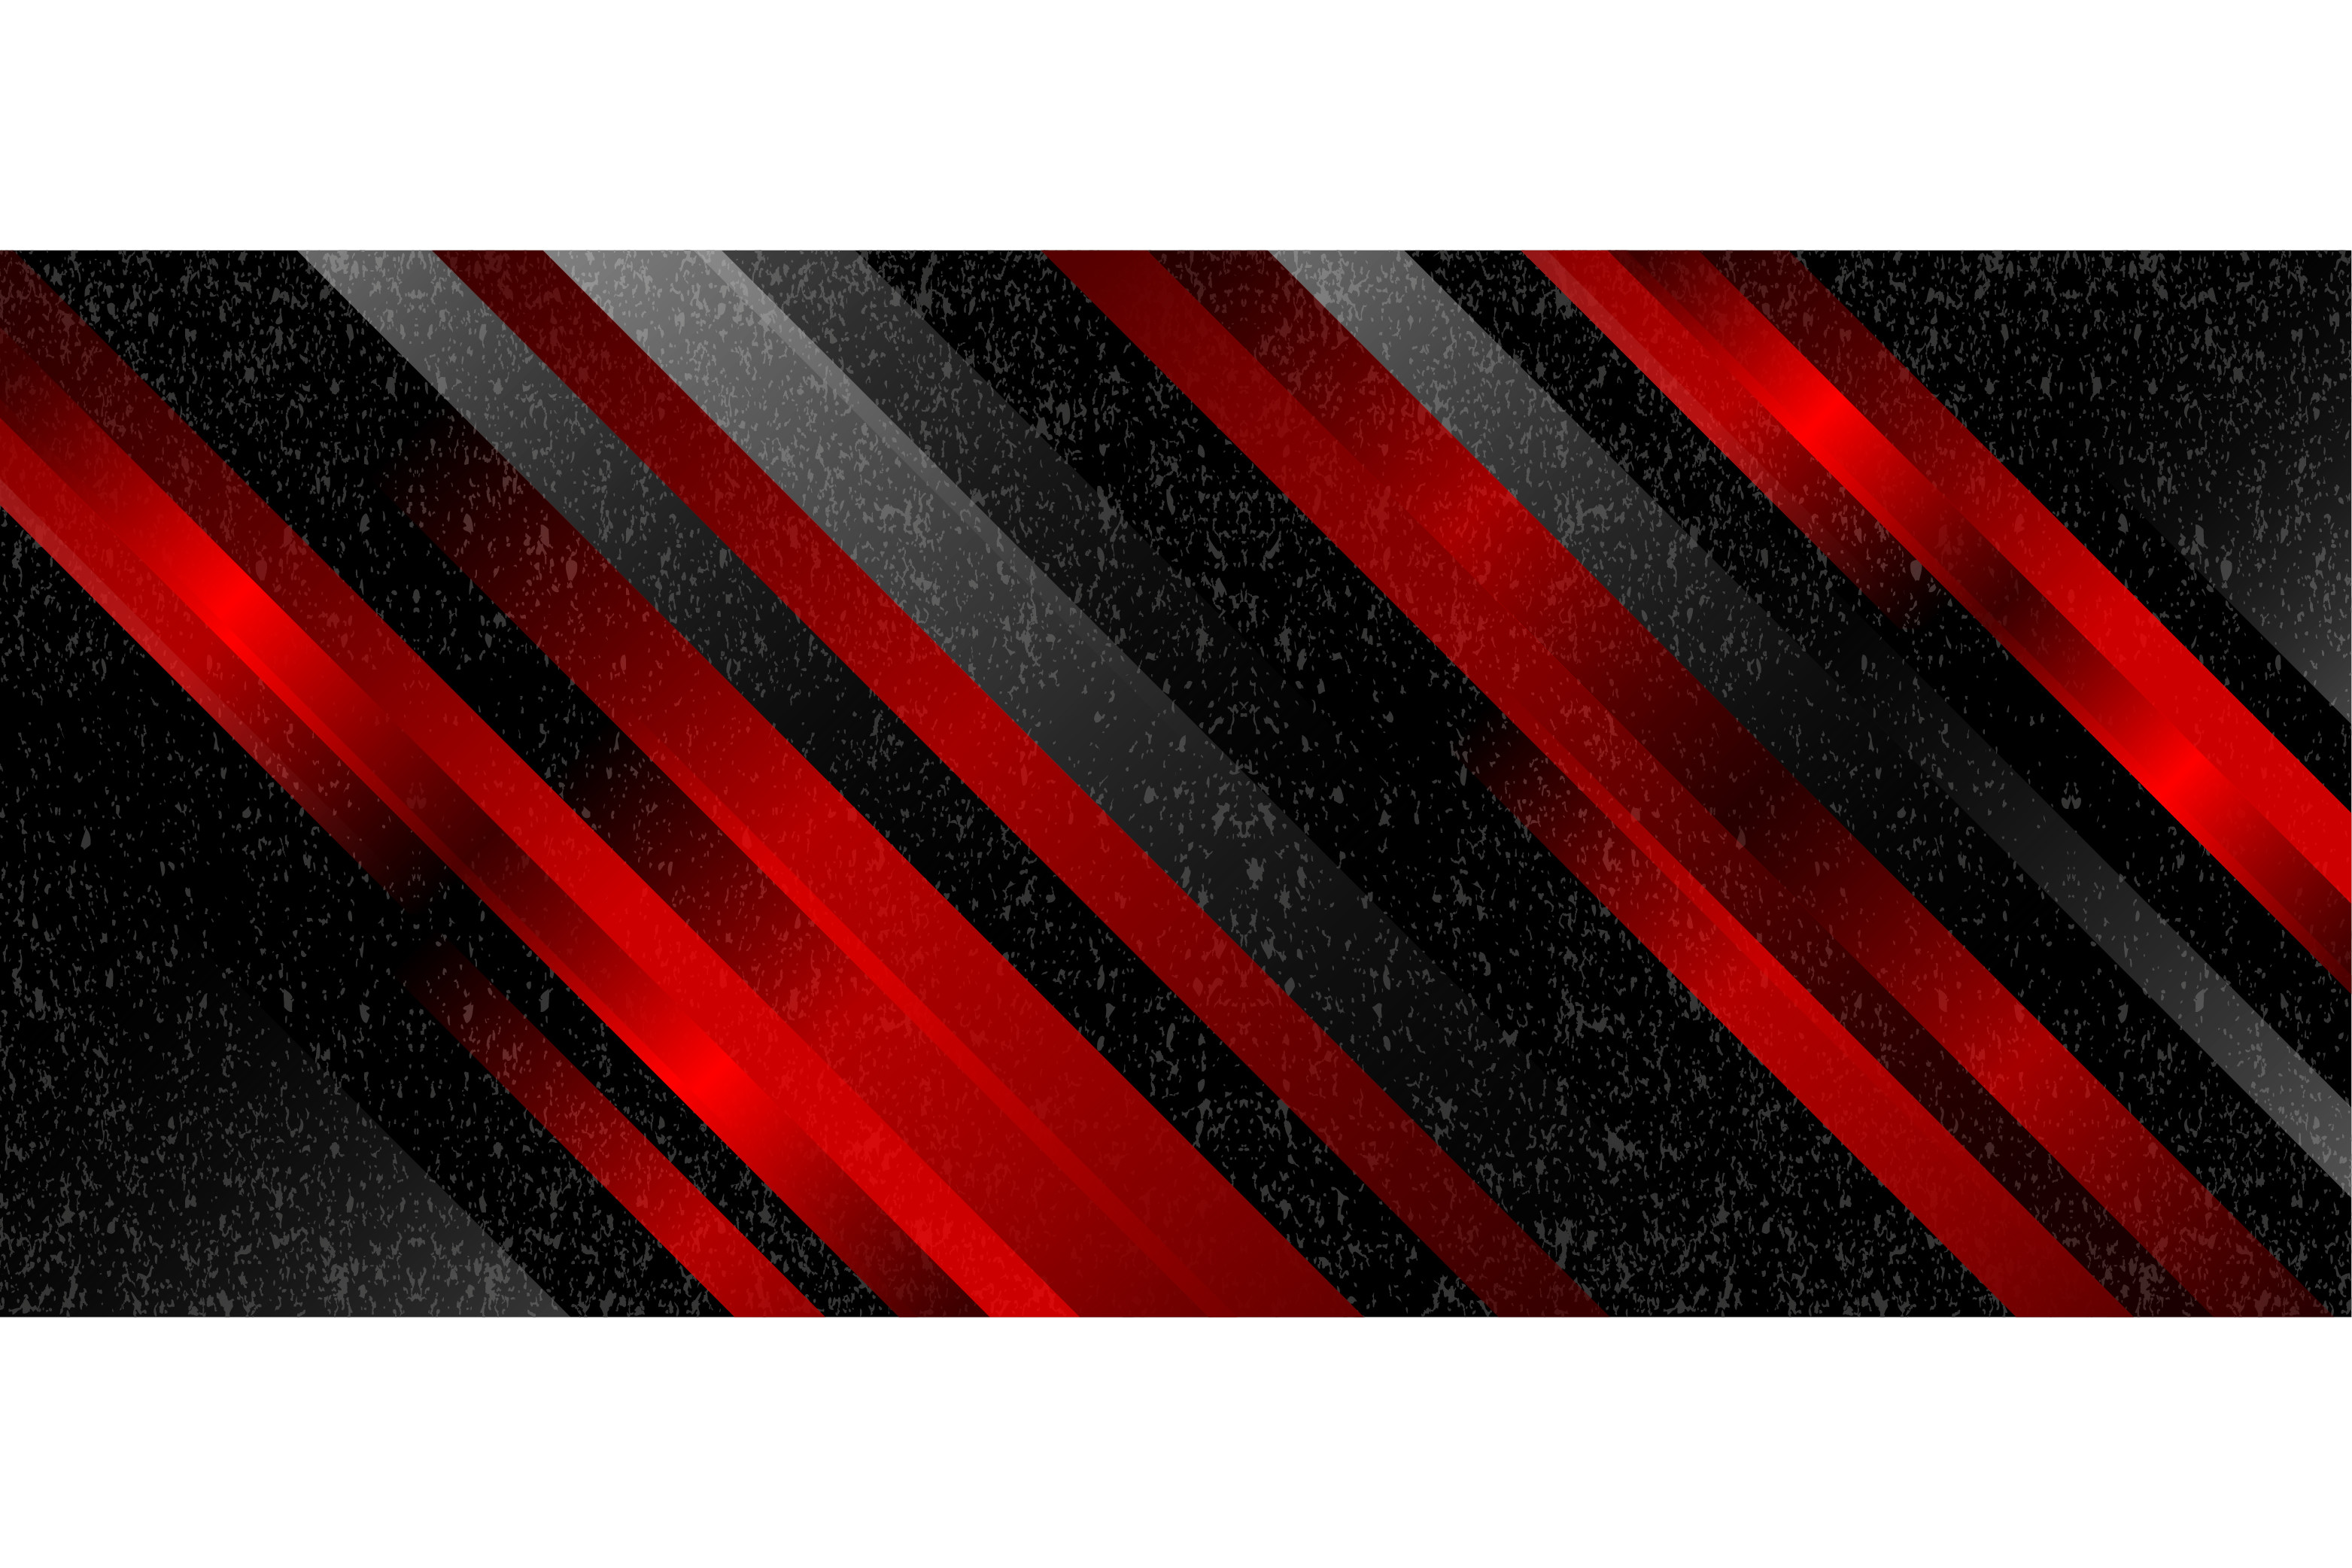 red and white grunge background